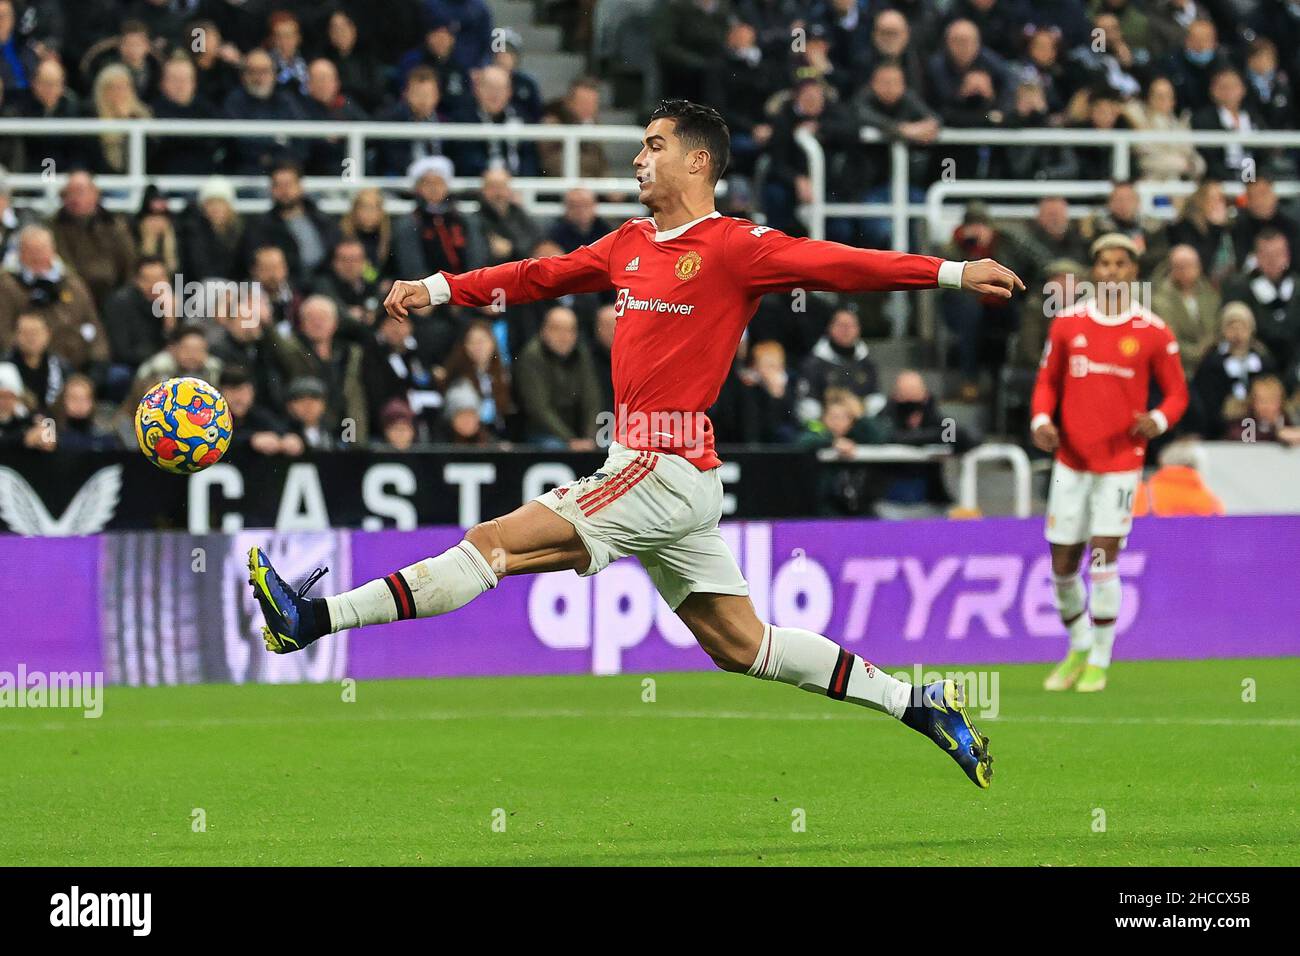 Cristiano Ronaldo #7 of Manchester United tries to control the ball in front of goal in, on 12/27/2021. (Photo by Mark Cosgrove/News Images/Sipa USA) Credit: Sipa USA/Alamy Live News Stock Photo